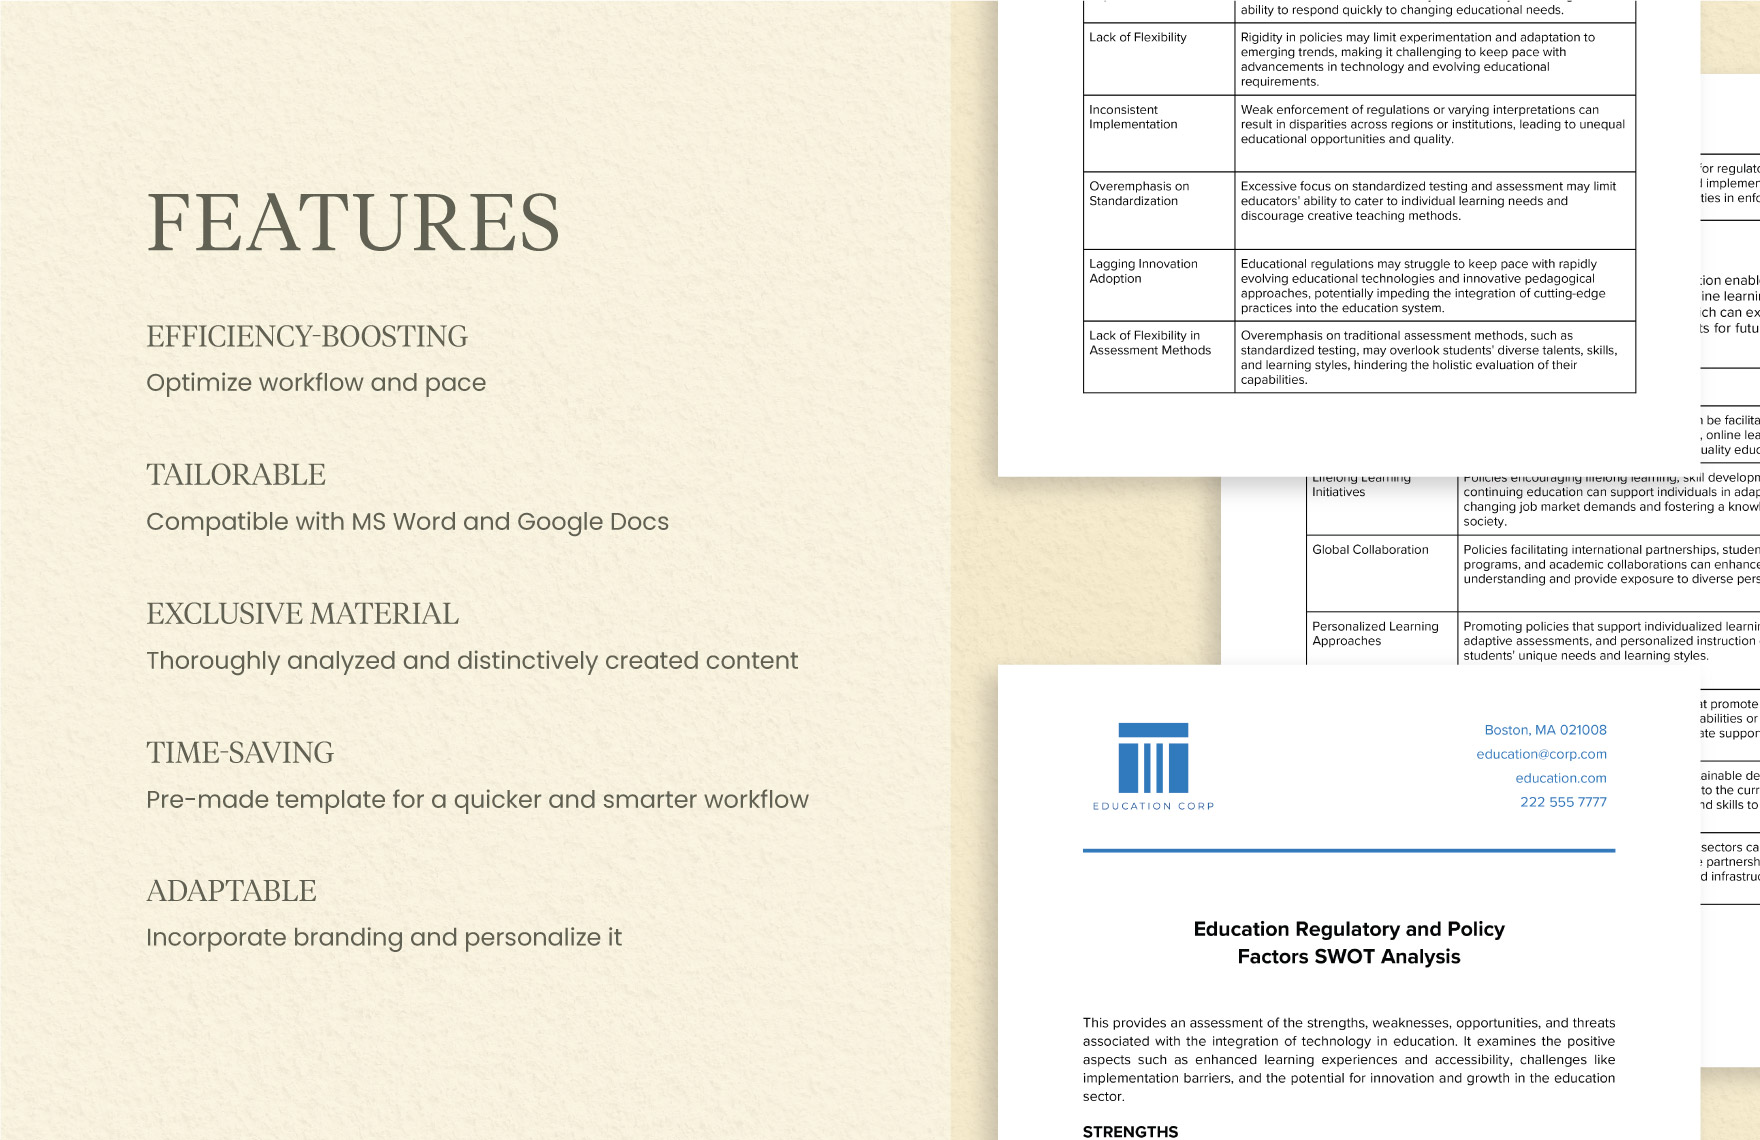 Education Regulatory and Policy Factors SWOT Analysis Template in Word ...